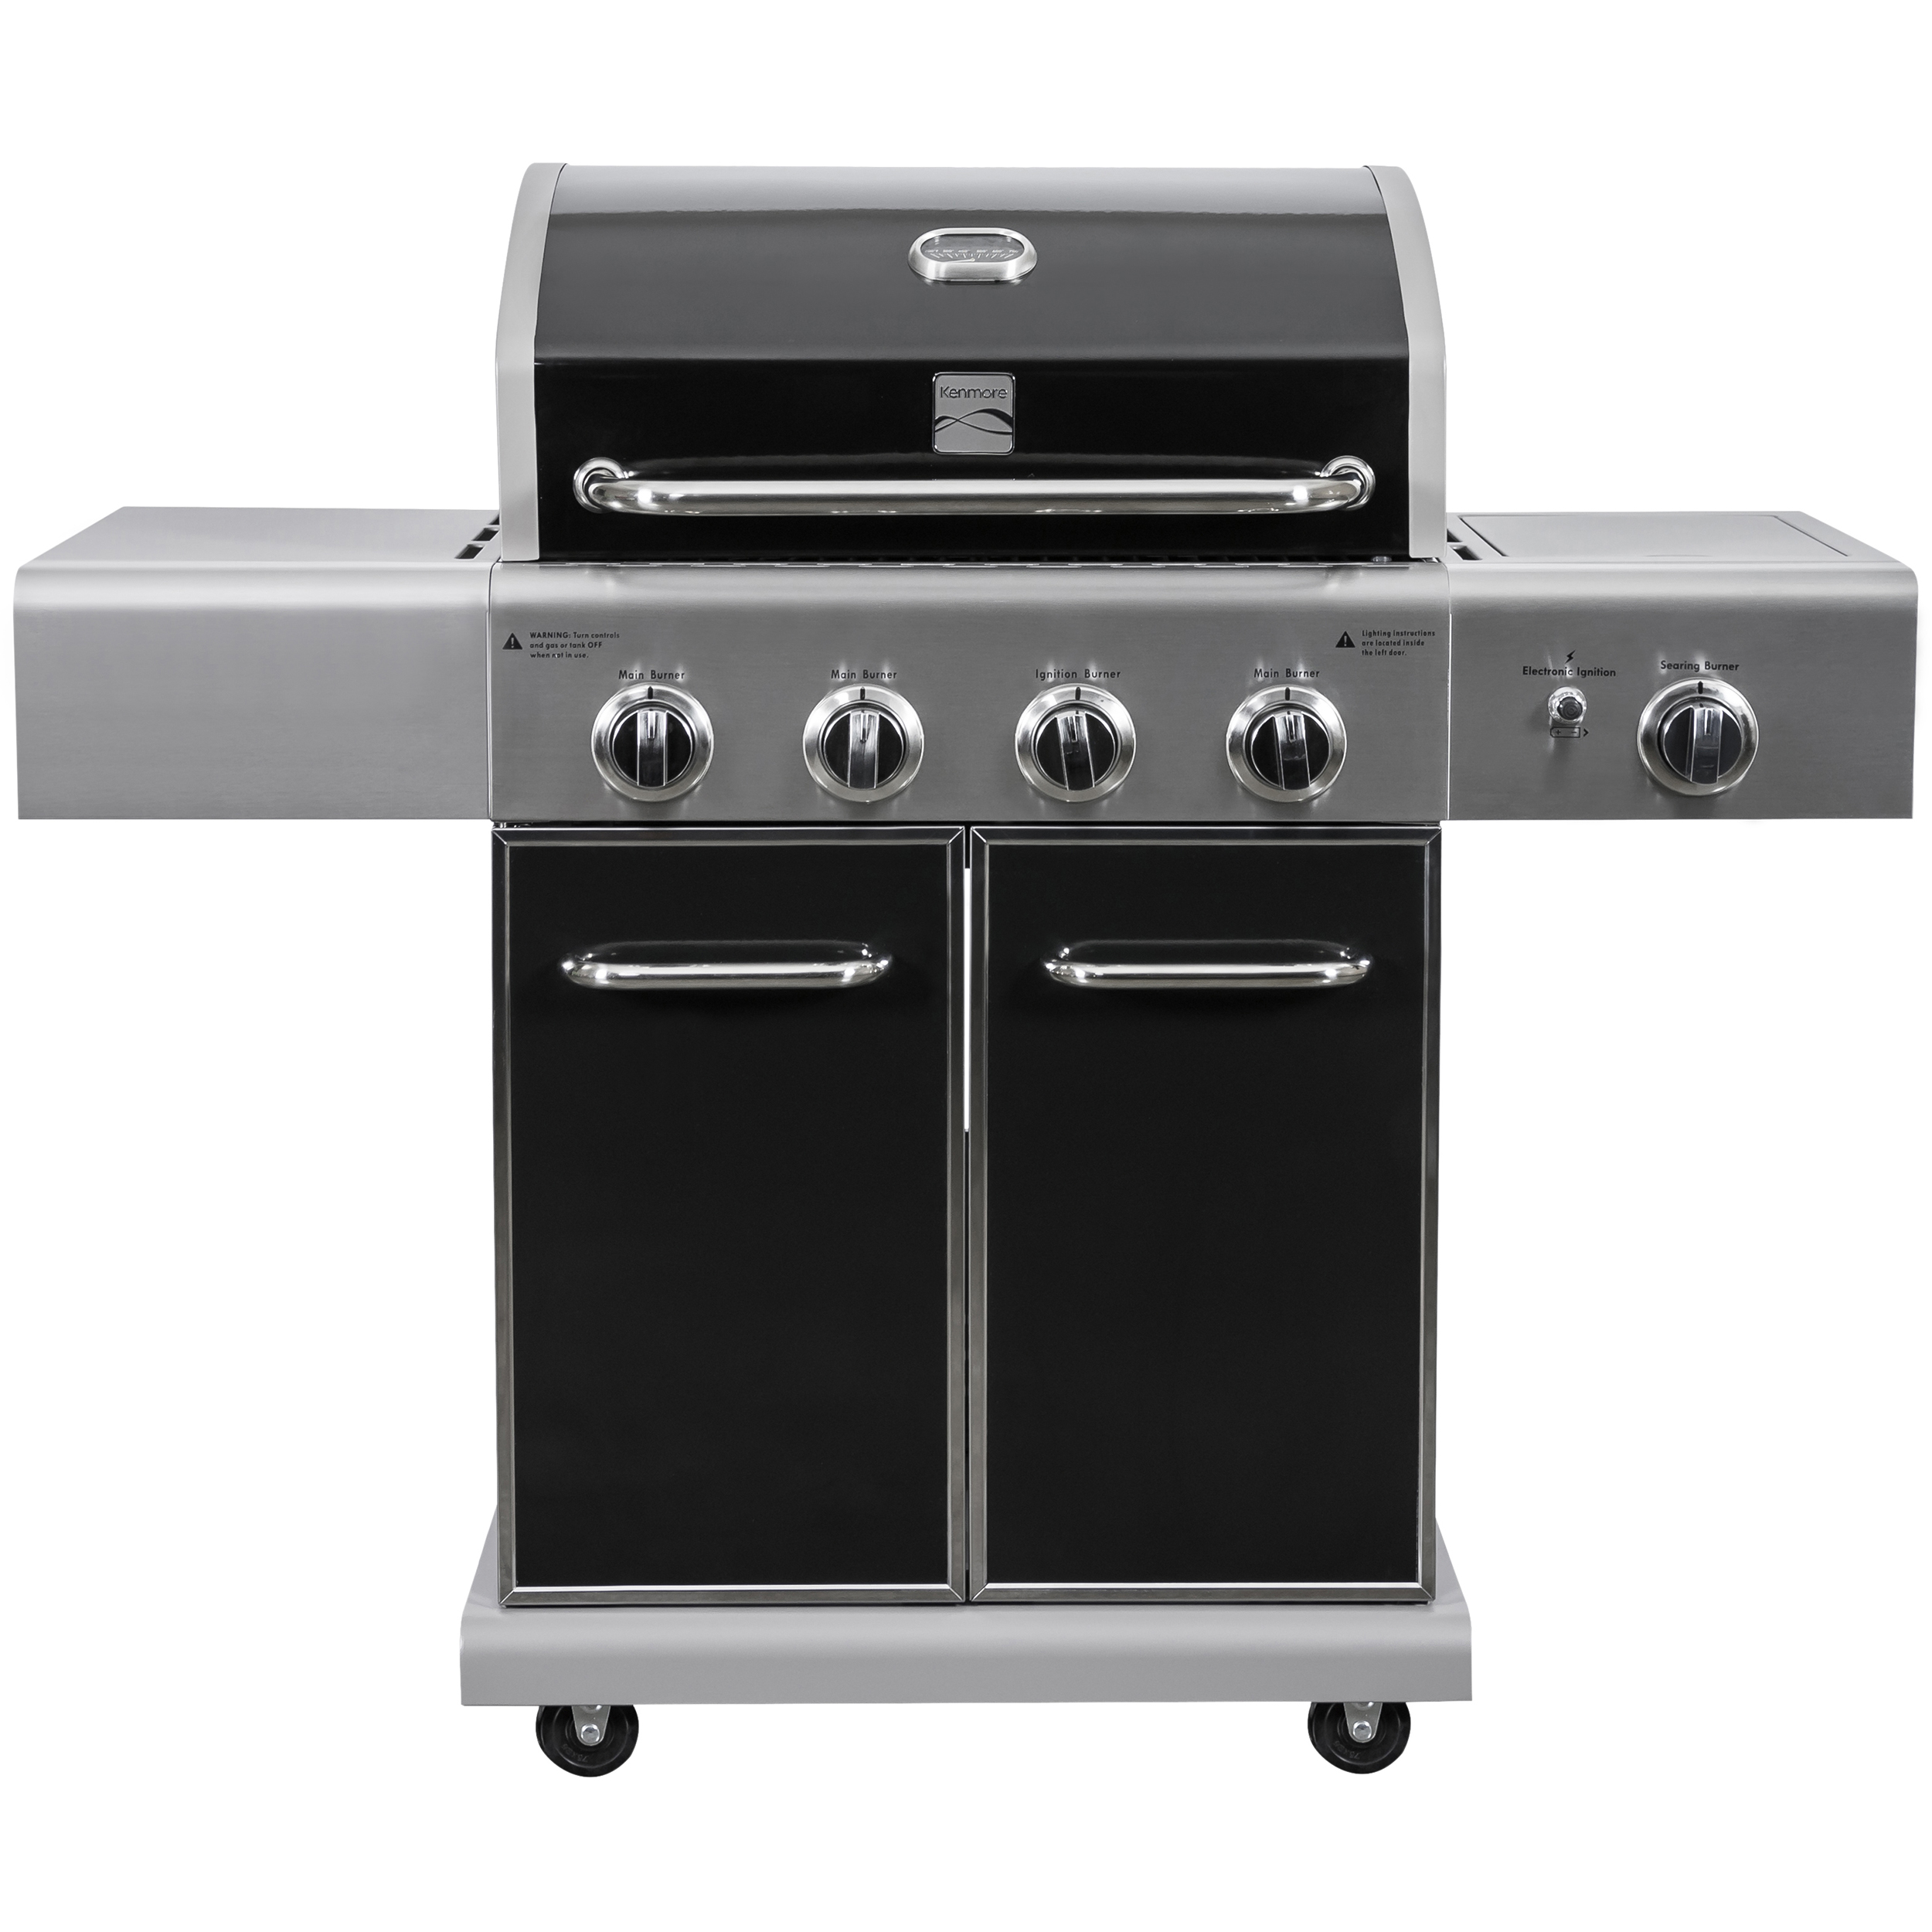 Kenmore 4-Burner Outdoor Propane Gas Grill with Searing Side Burner, Stainless Steel with Black Trim - image 1 of 8